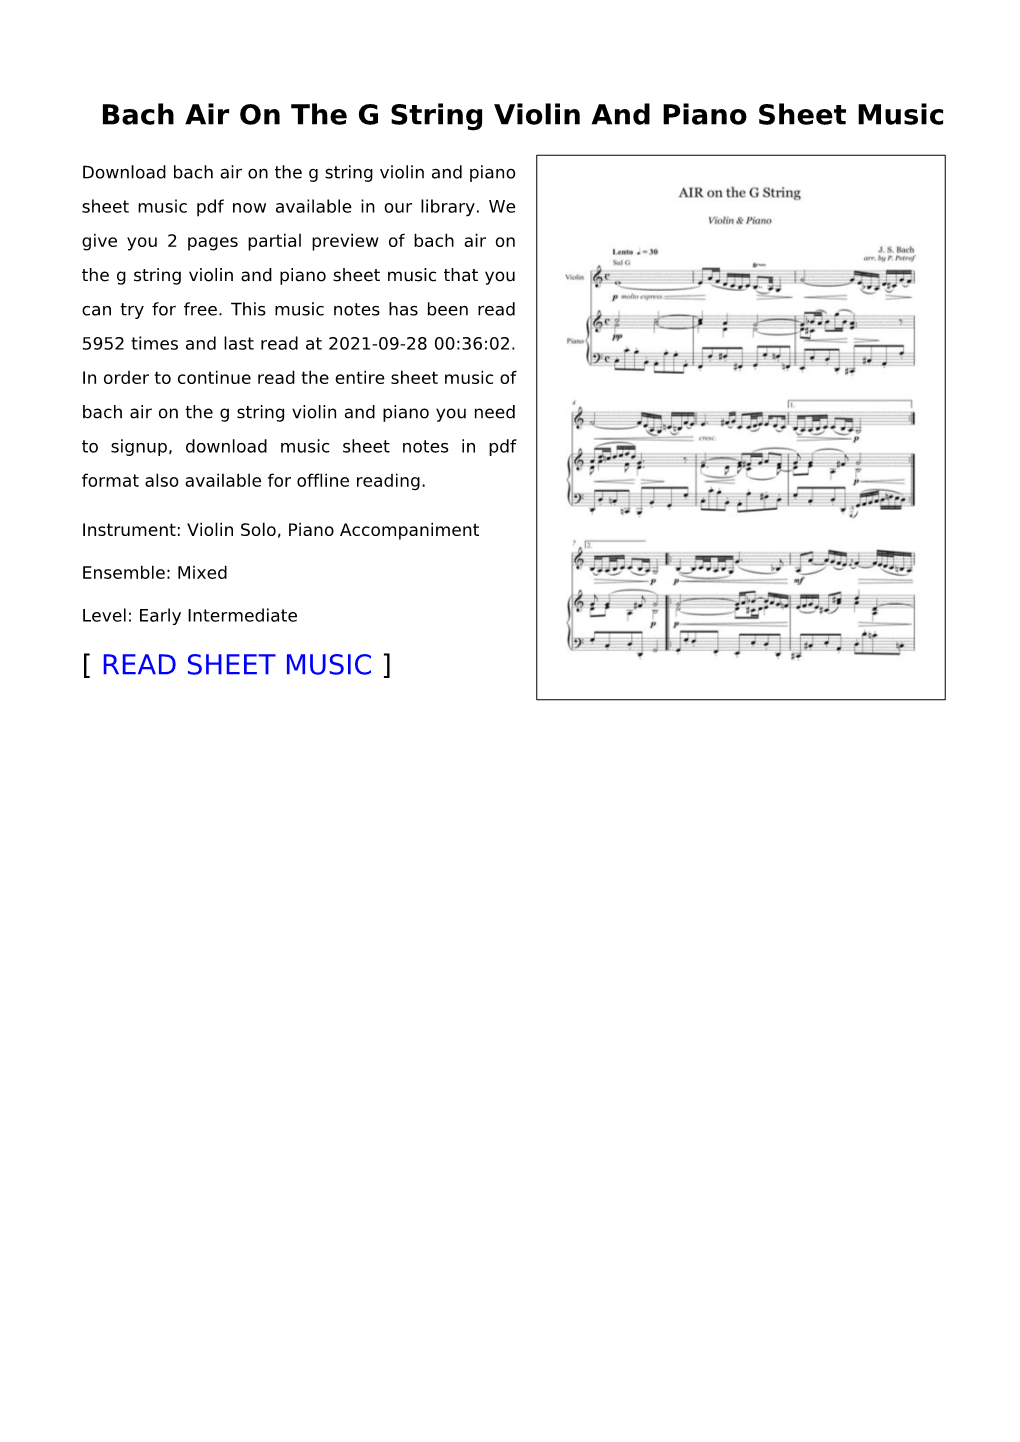 Bach Air on the G String Violin and Piano Sheet Music